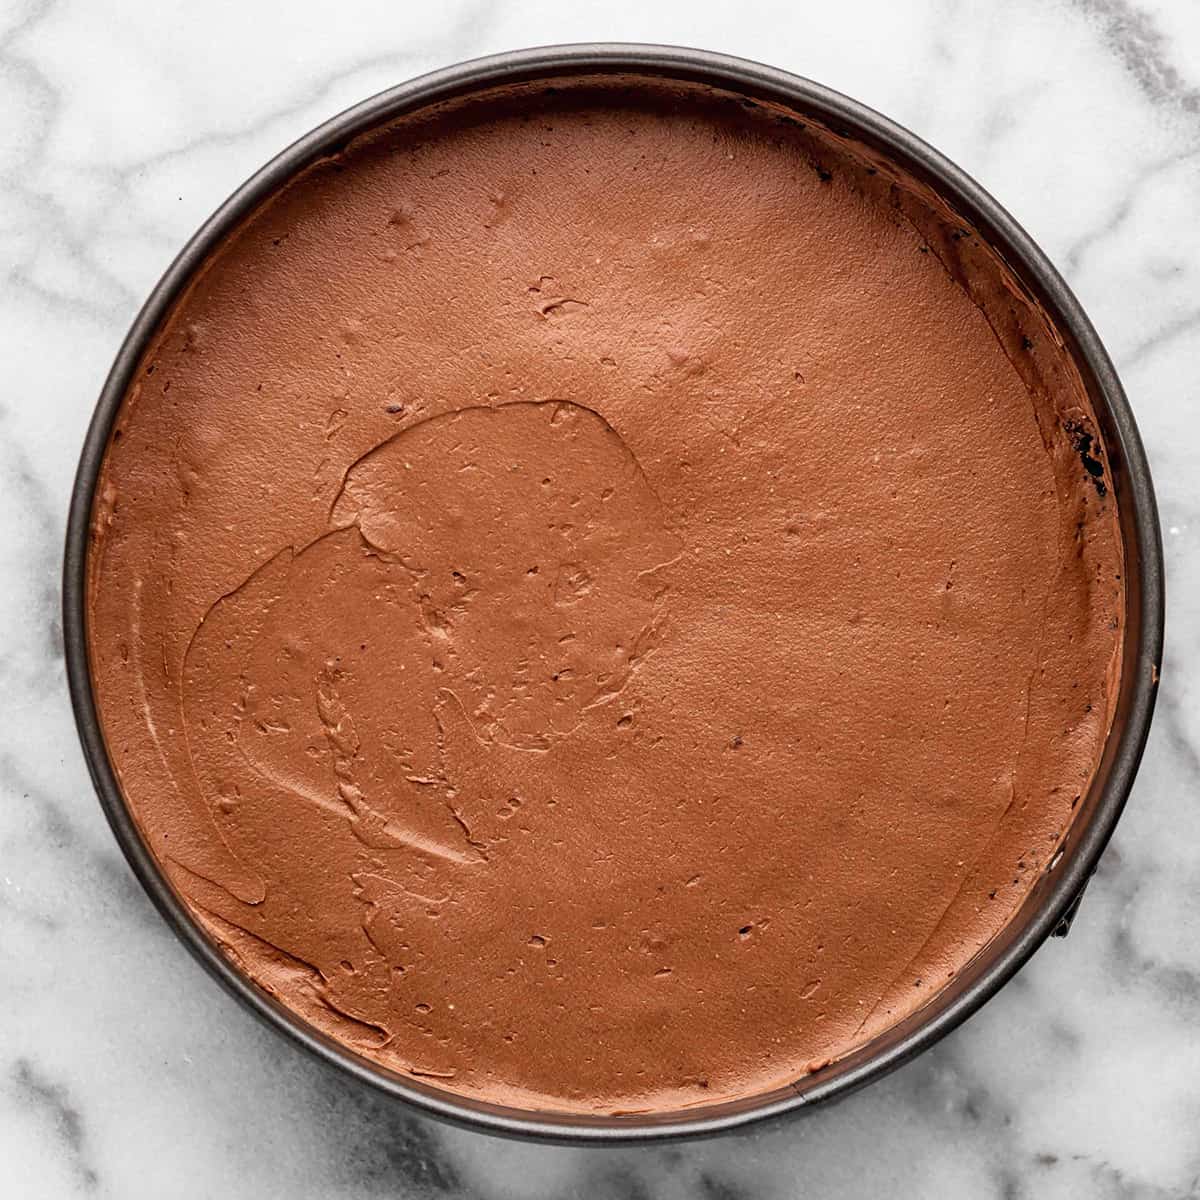 No Bake Chocolate Cheesecake filling spread into the prepared crust in a pan